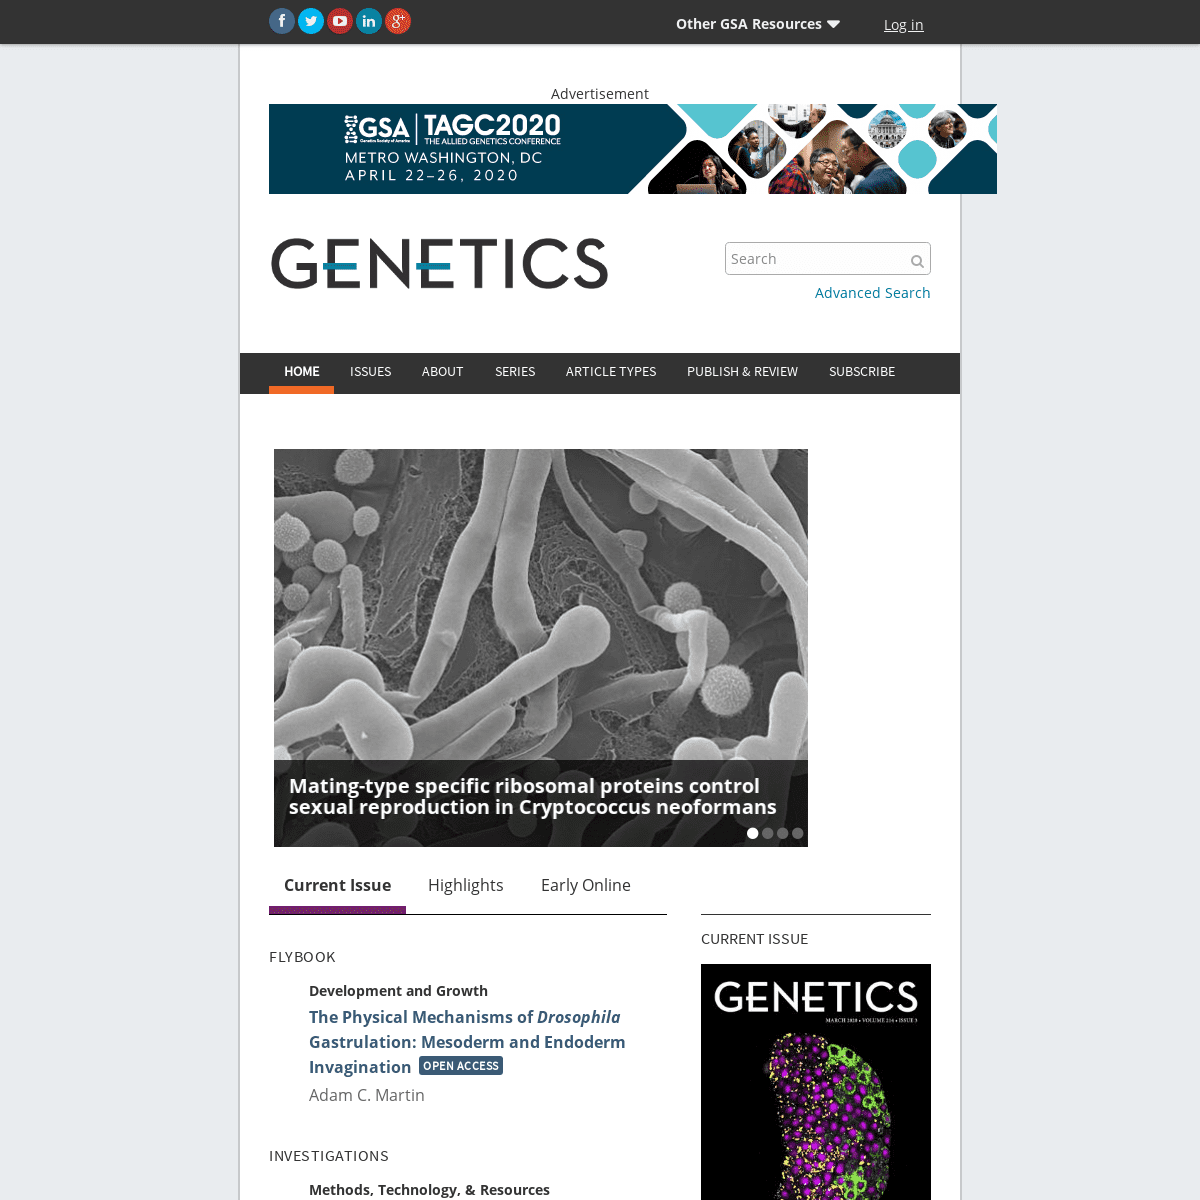 A complete backup of genetics.org